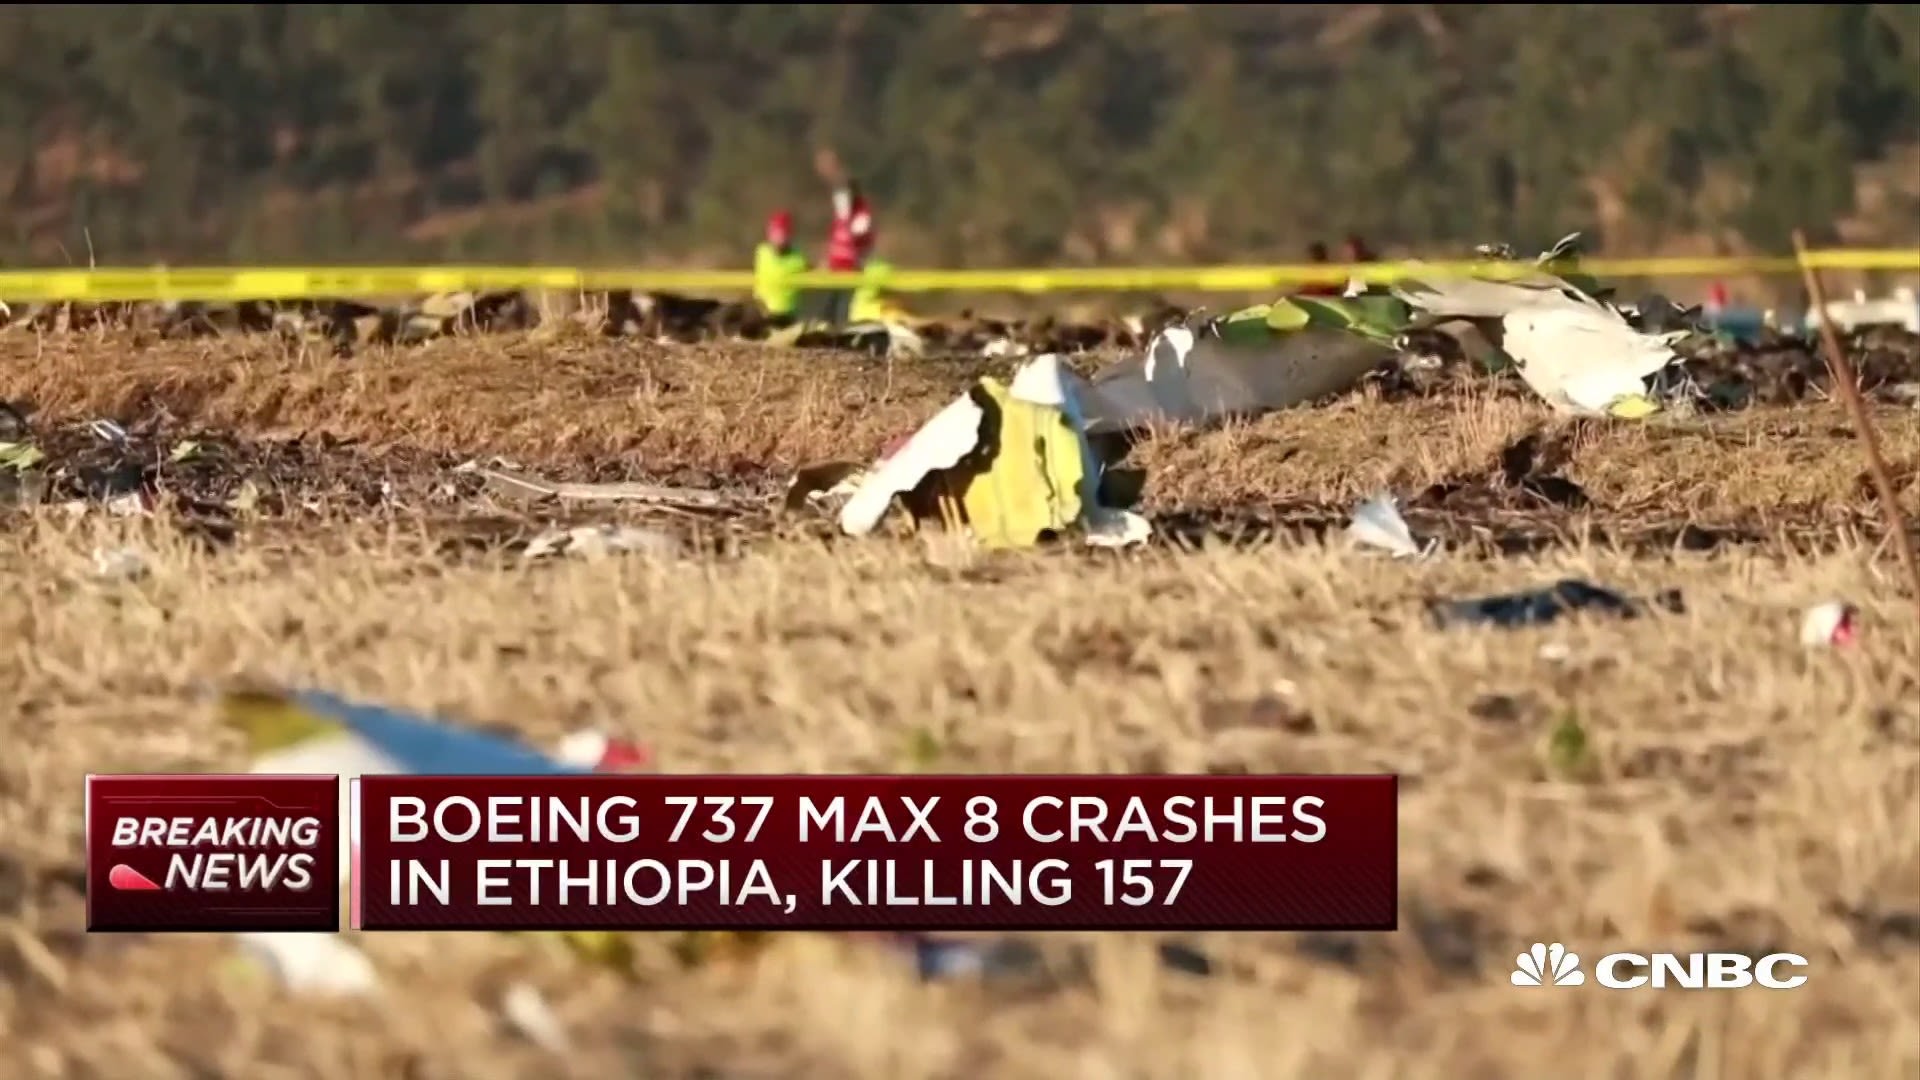 1920x1080 Here's what the Boeing Ethiopian Airlines crash investigation is focused on